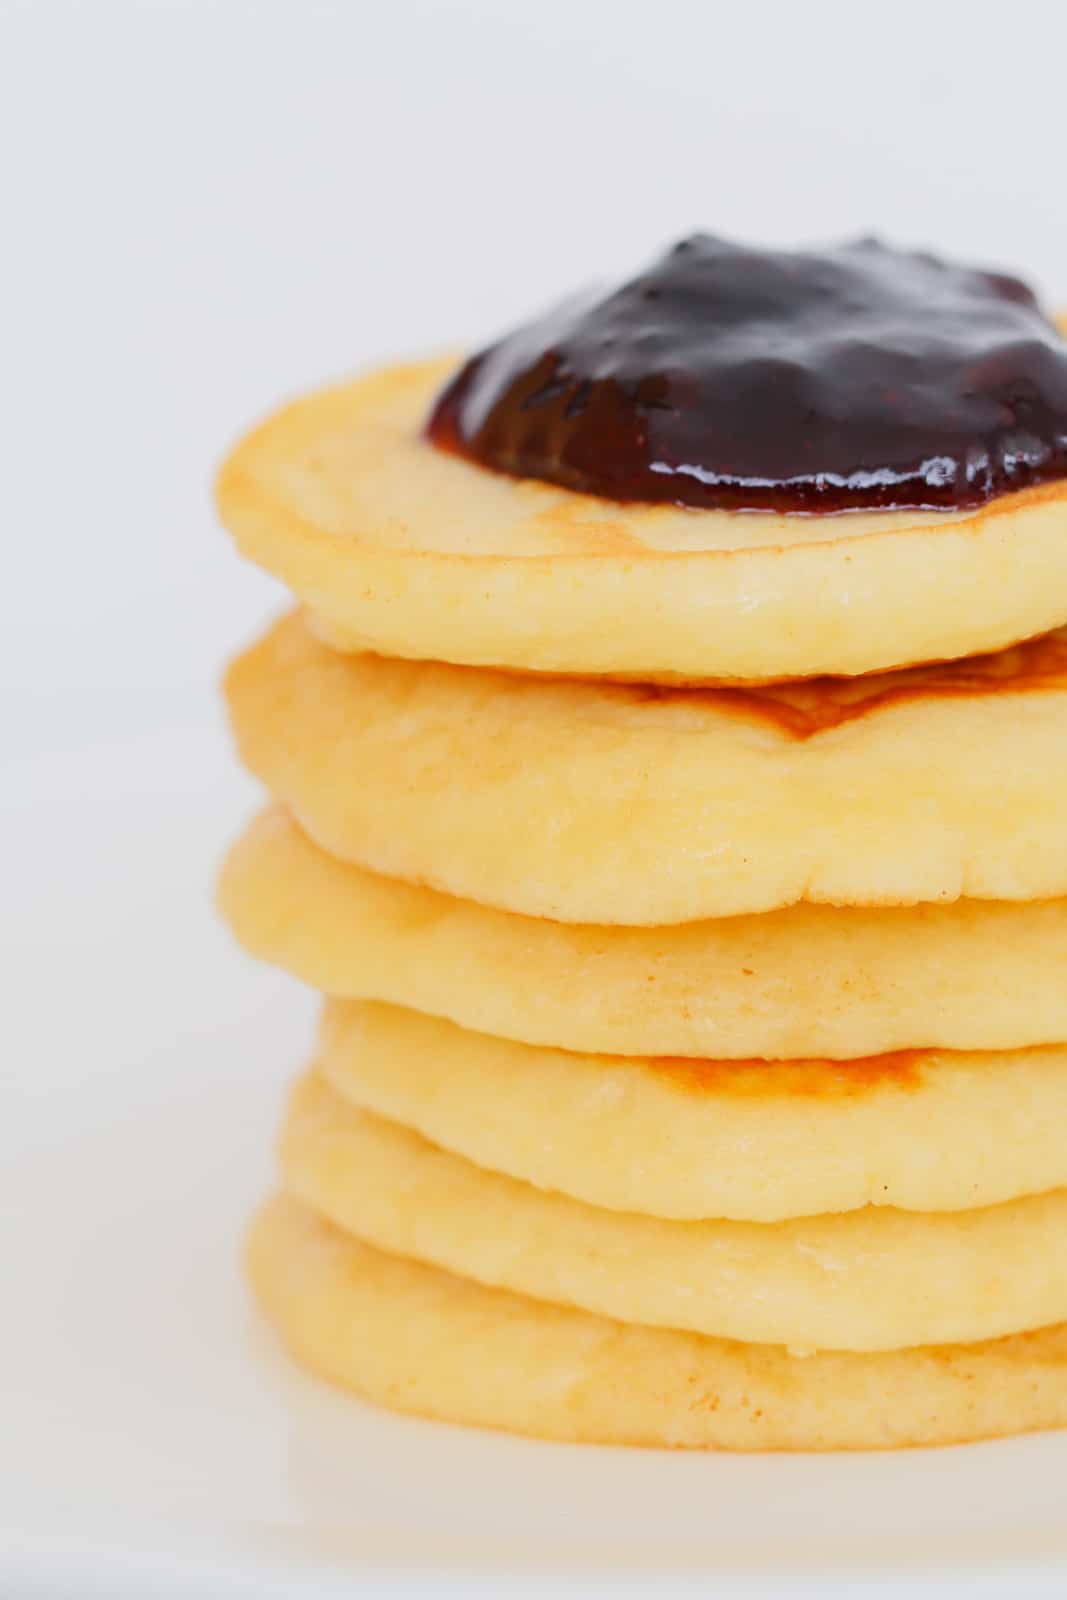 A close up of a pile of small sweet round pikelets with jam on the top one.